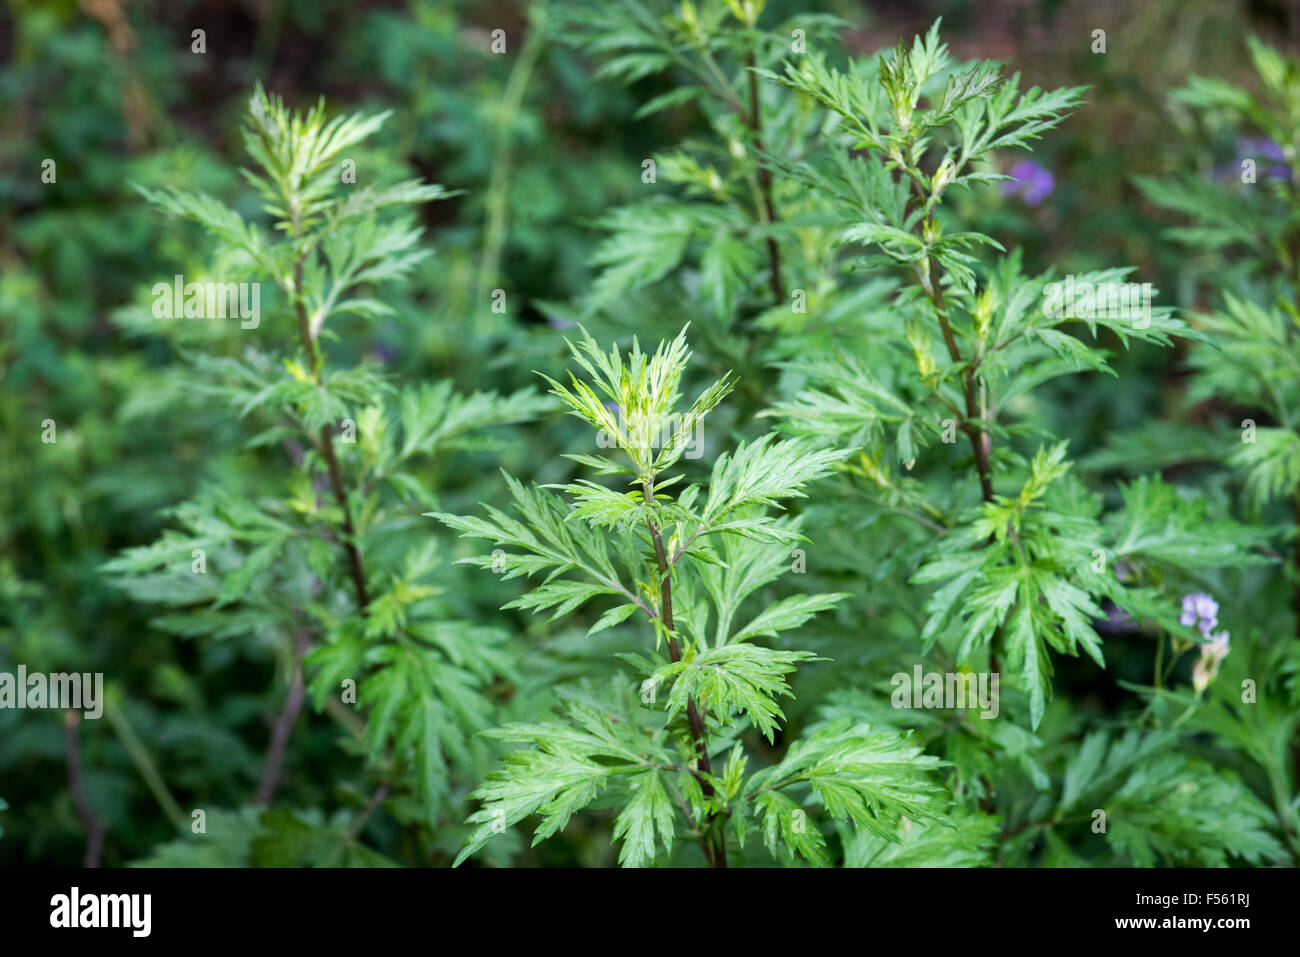 14.06.2015, Berlin, Berlin, Germany  - The common ragweed or the ragweed (Ambrosia artemisiifolia) originated in America and was imported about 150 years ago in Europe. As invasive neophyte the mugwort ambrosia has spread stronger here in recent years. Since the plant has a high allergenic potential, individual plants should already be reliably detected and eliminated. 00Y150614D003CAROEX.JPG - NOT for SALE in G E R M A N Y, A U S T R I A, S W I T Z E R L A N D [MODEL RELEASE: NOT APPLICABLE, PROPERTY RELEASE: NO (c) caro photo agency / Teich, http://www.caro-images.pl, info@carofoto.pl - In c Stock Photo